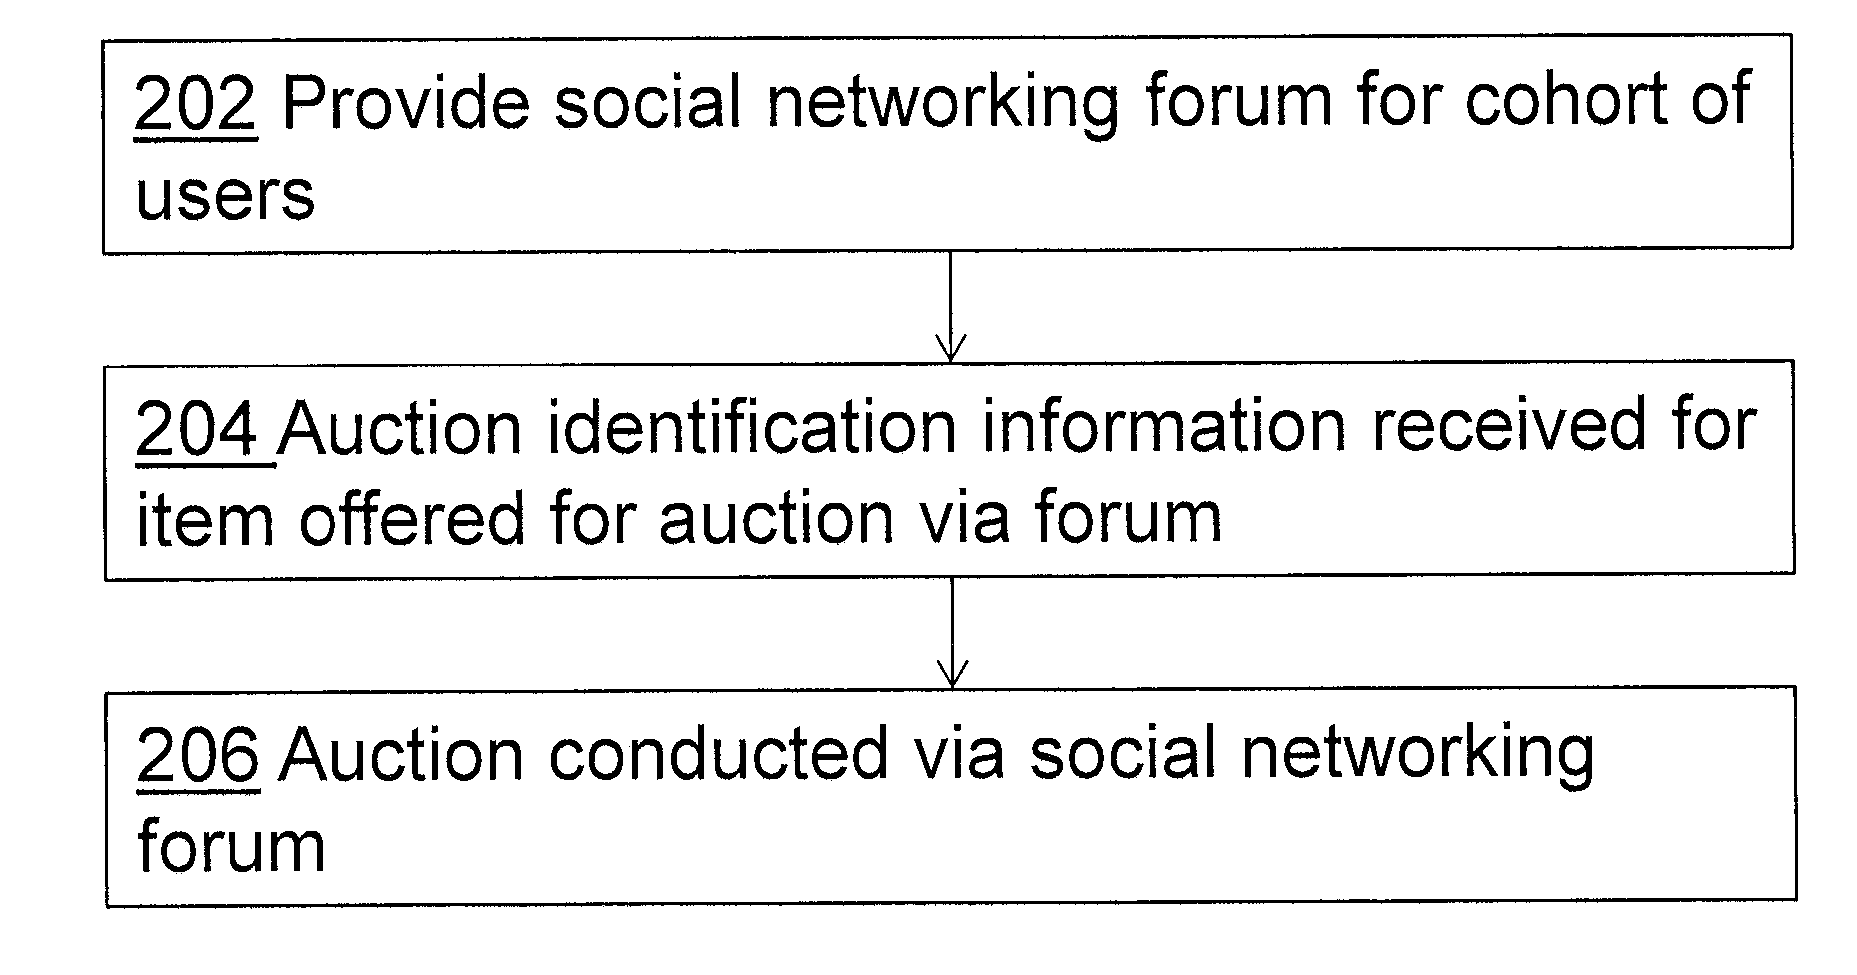 System and method for conducting an online auction via a social networking forum